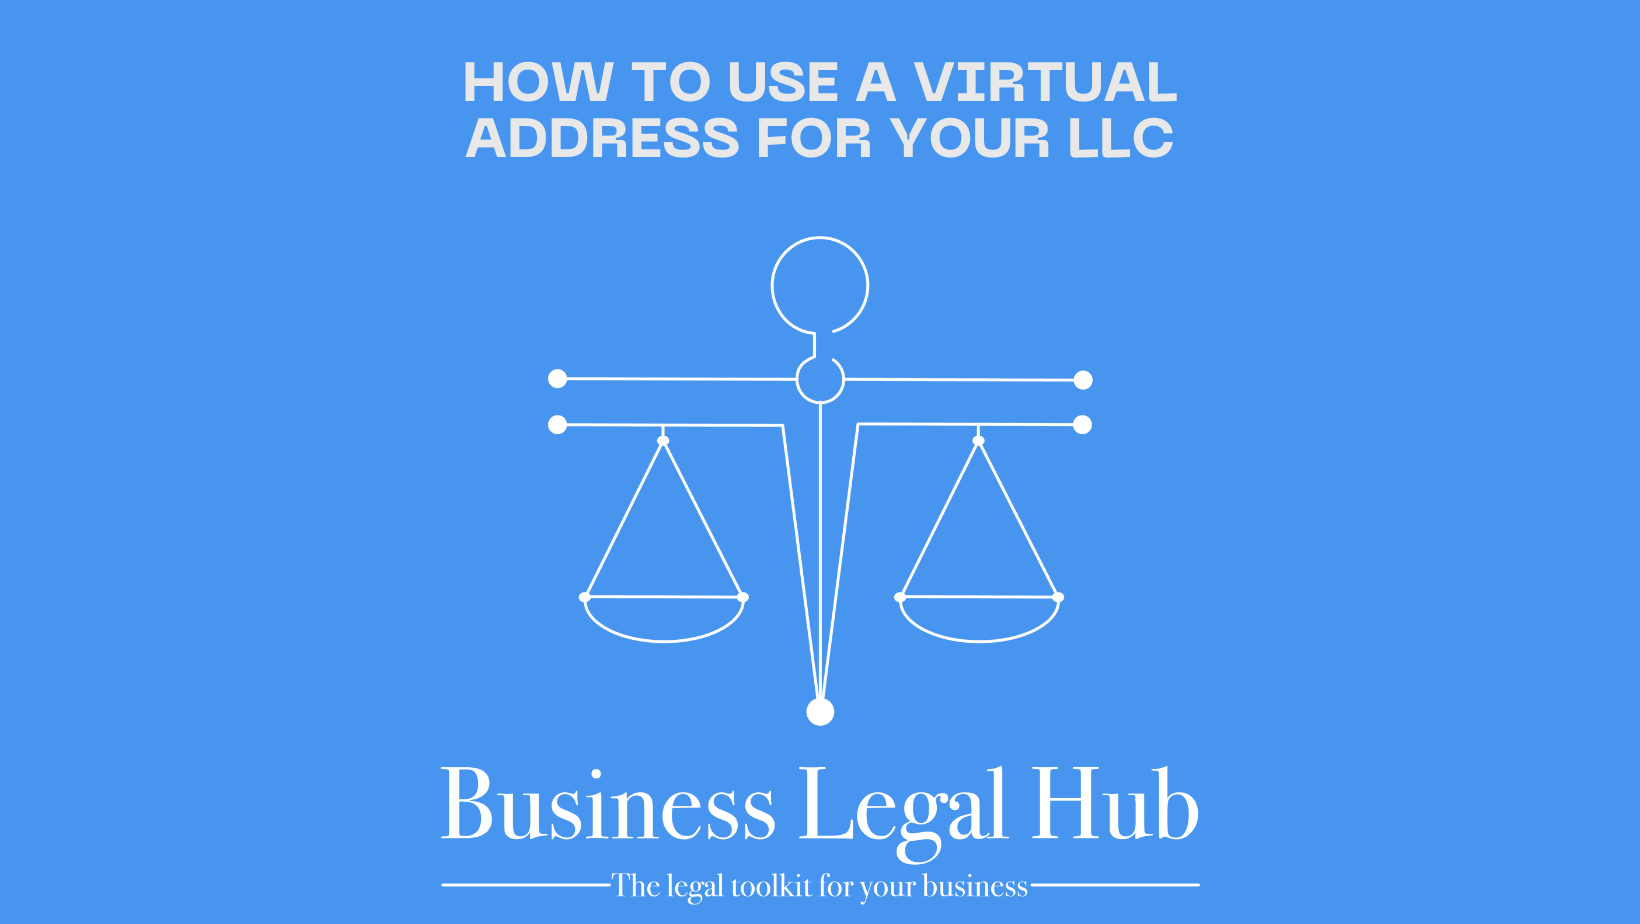 How To Use a Virtual Address for Your LLC - Business Legal Hub